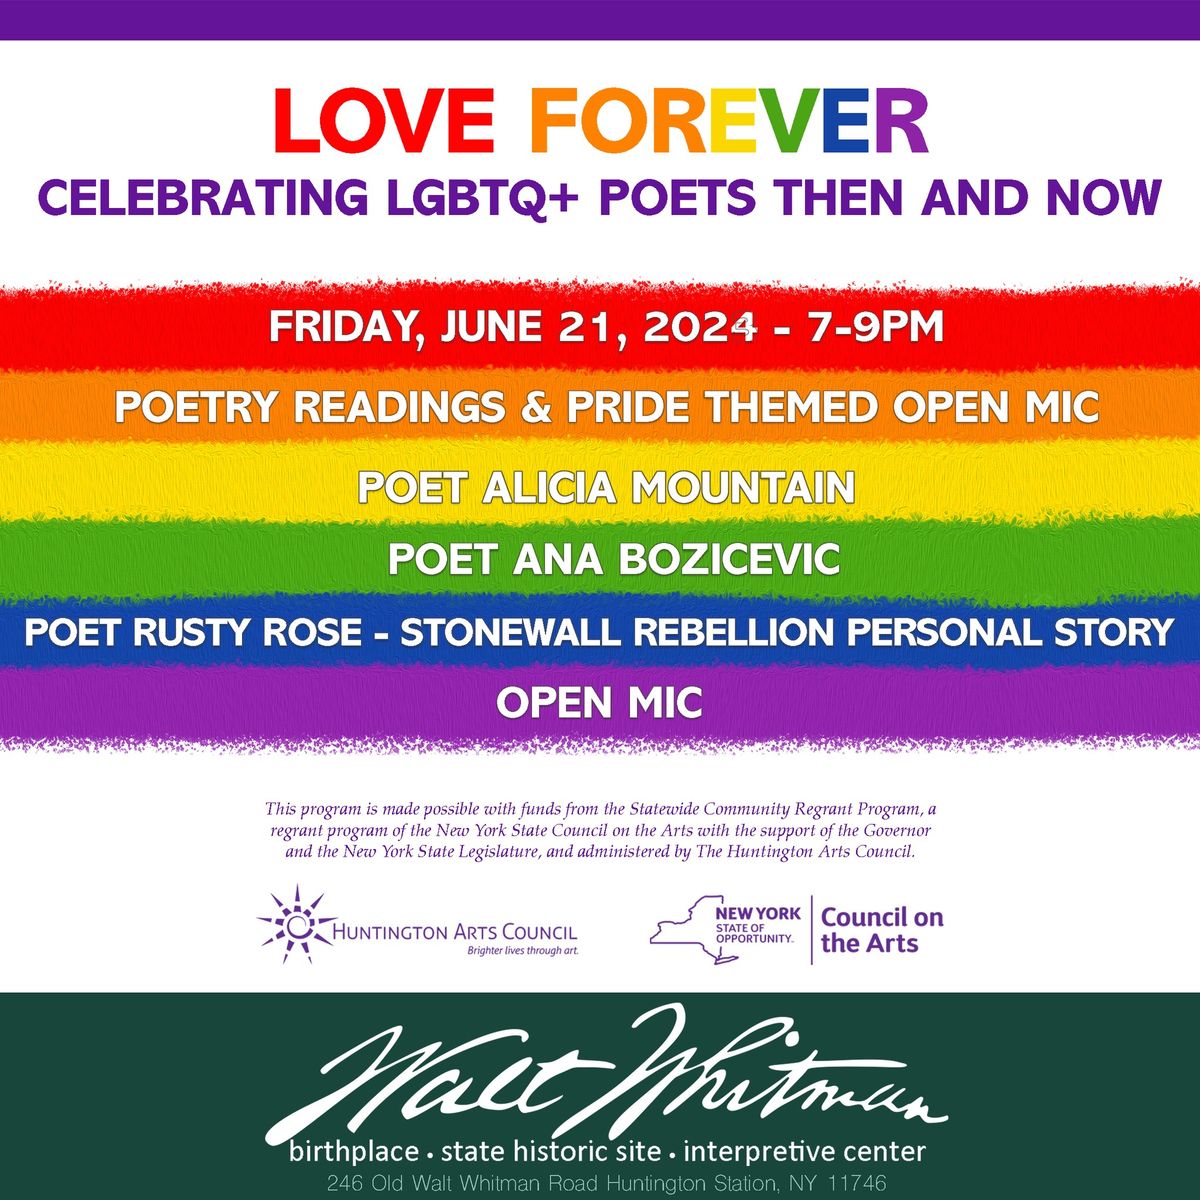 Love Forever \u2013 Celebrating LGBTQ+ Poets Then and Now